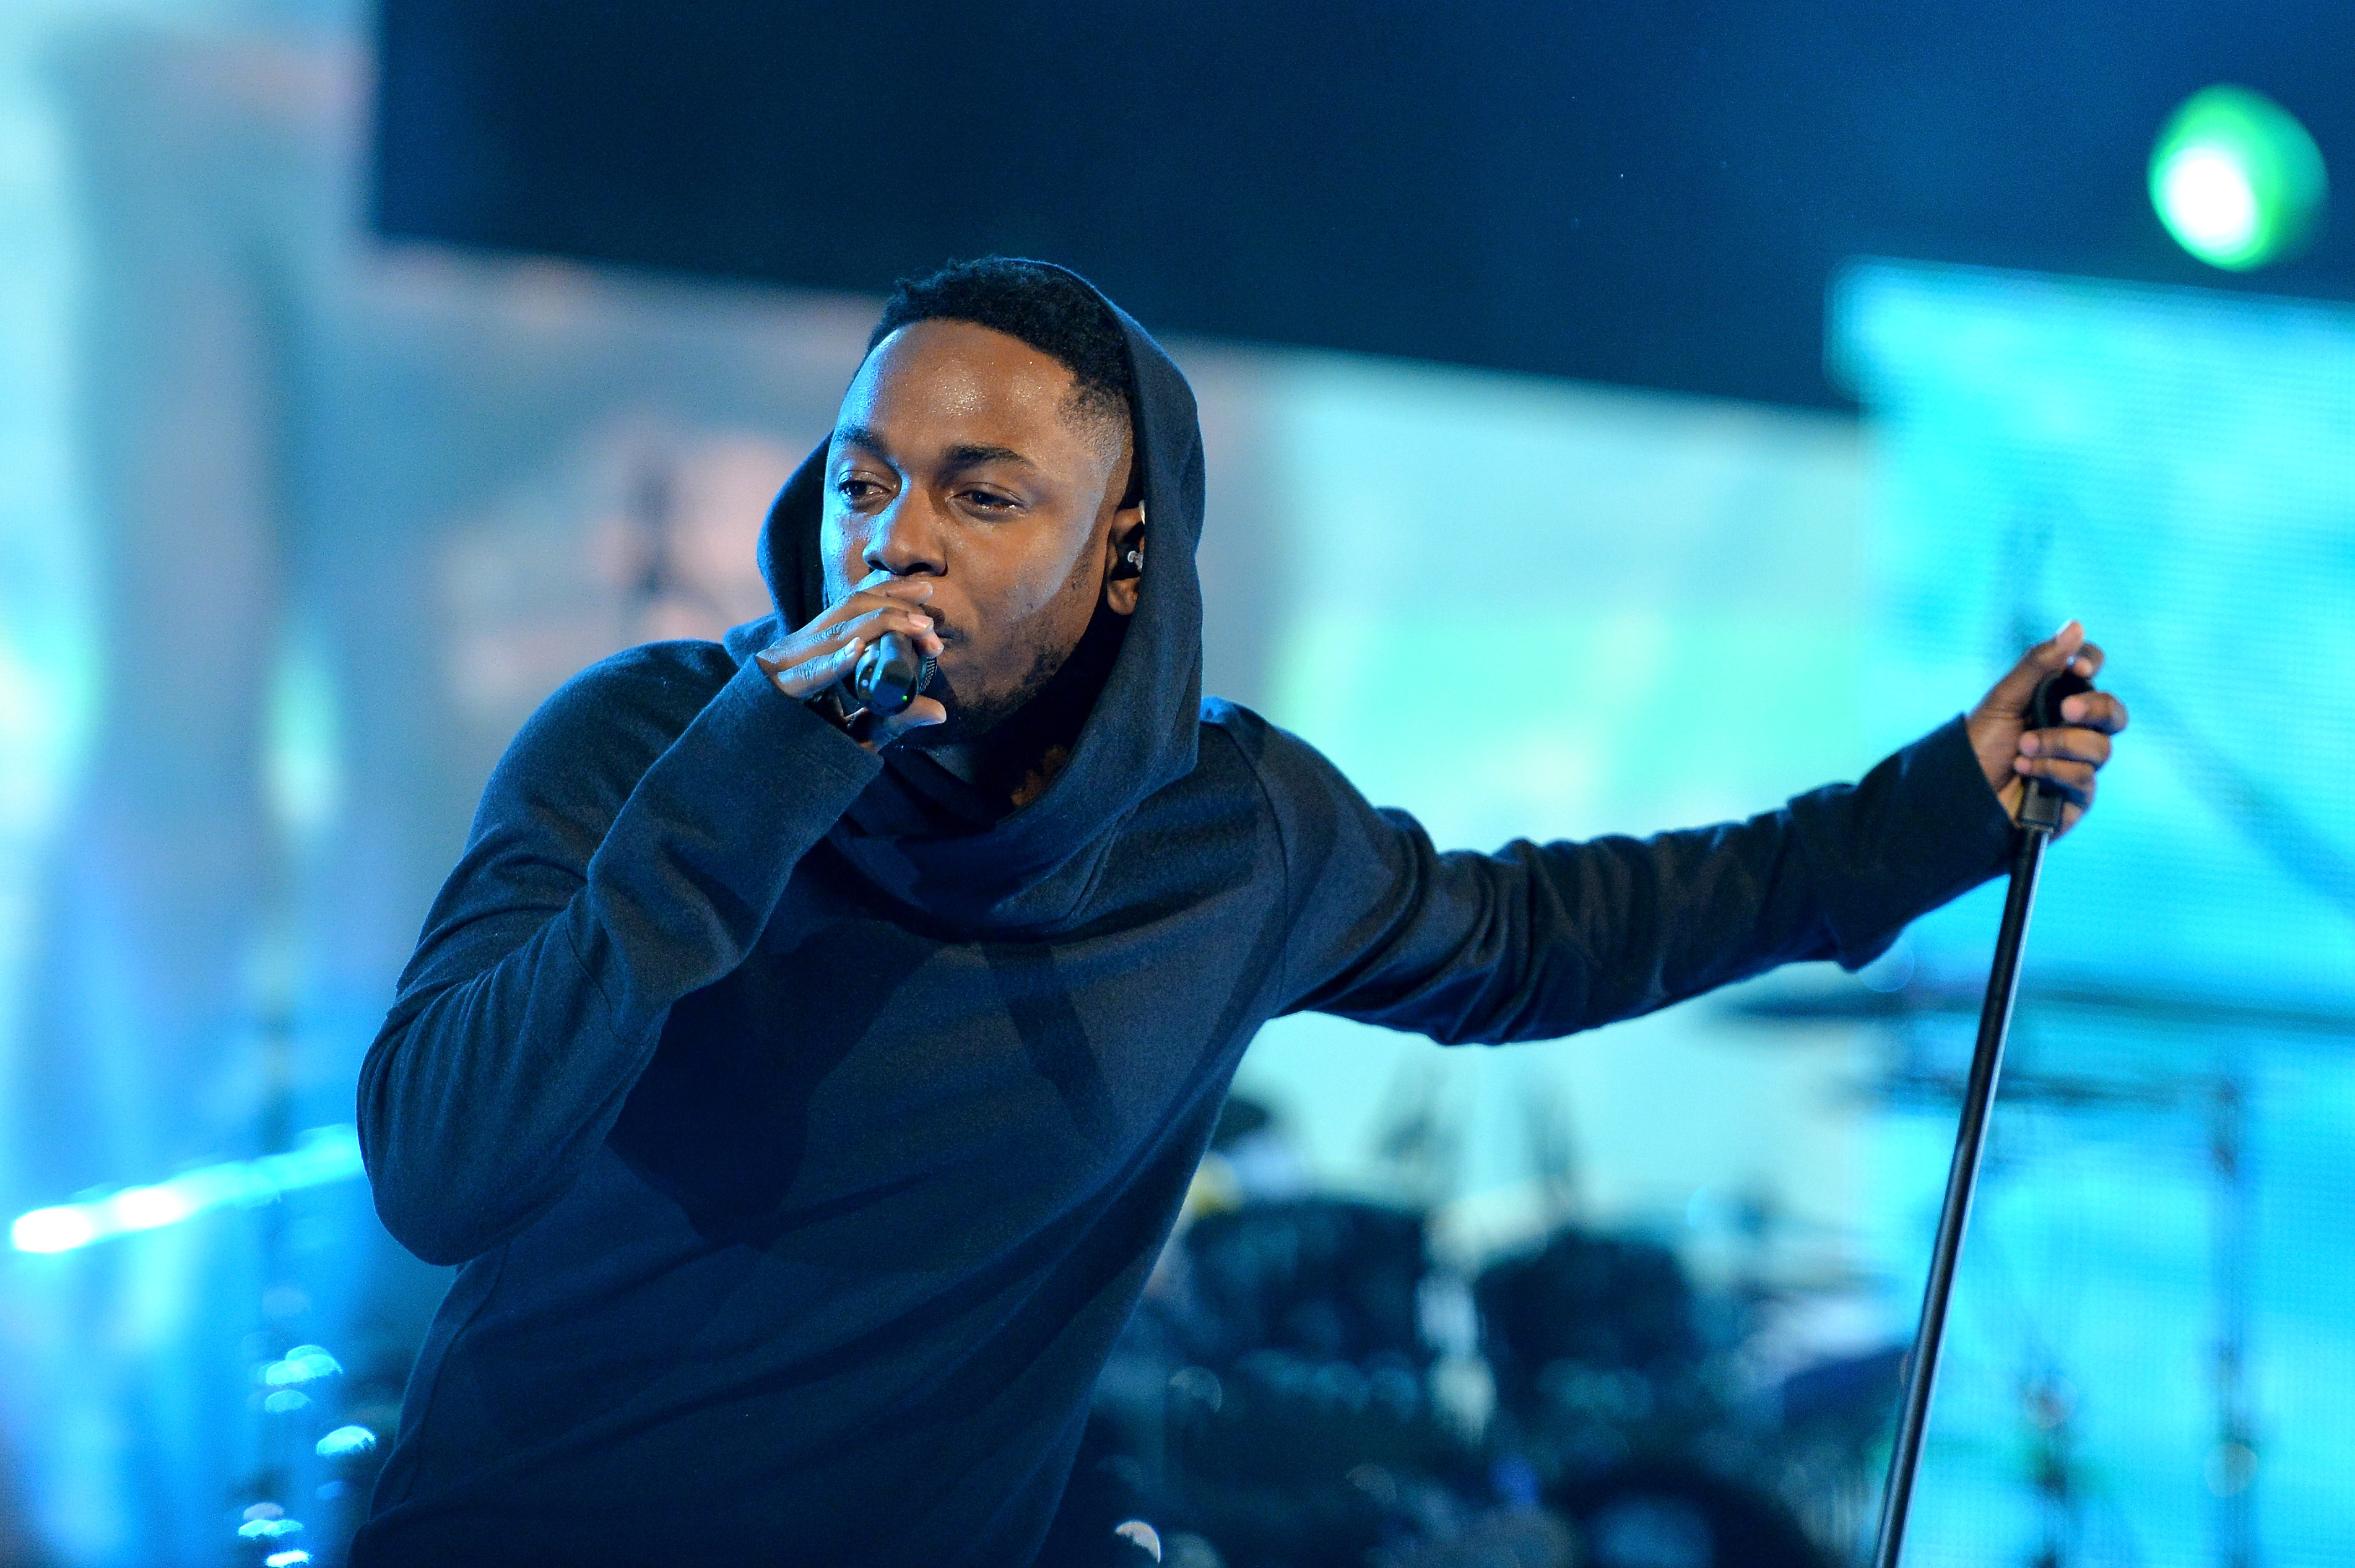 Musician Kendrick Lamar performs onstage at the State Farm All-Star Saturday Night during the NBA All-Star Weekend 2014 at The Smoothie King Center on February 15, 2014 in New Orleans. (Mike Coppola—Getty Images)